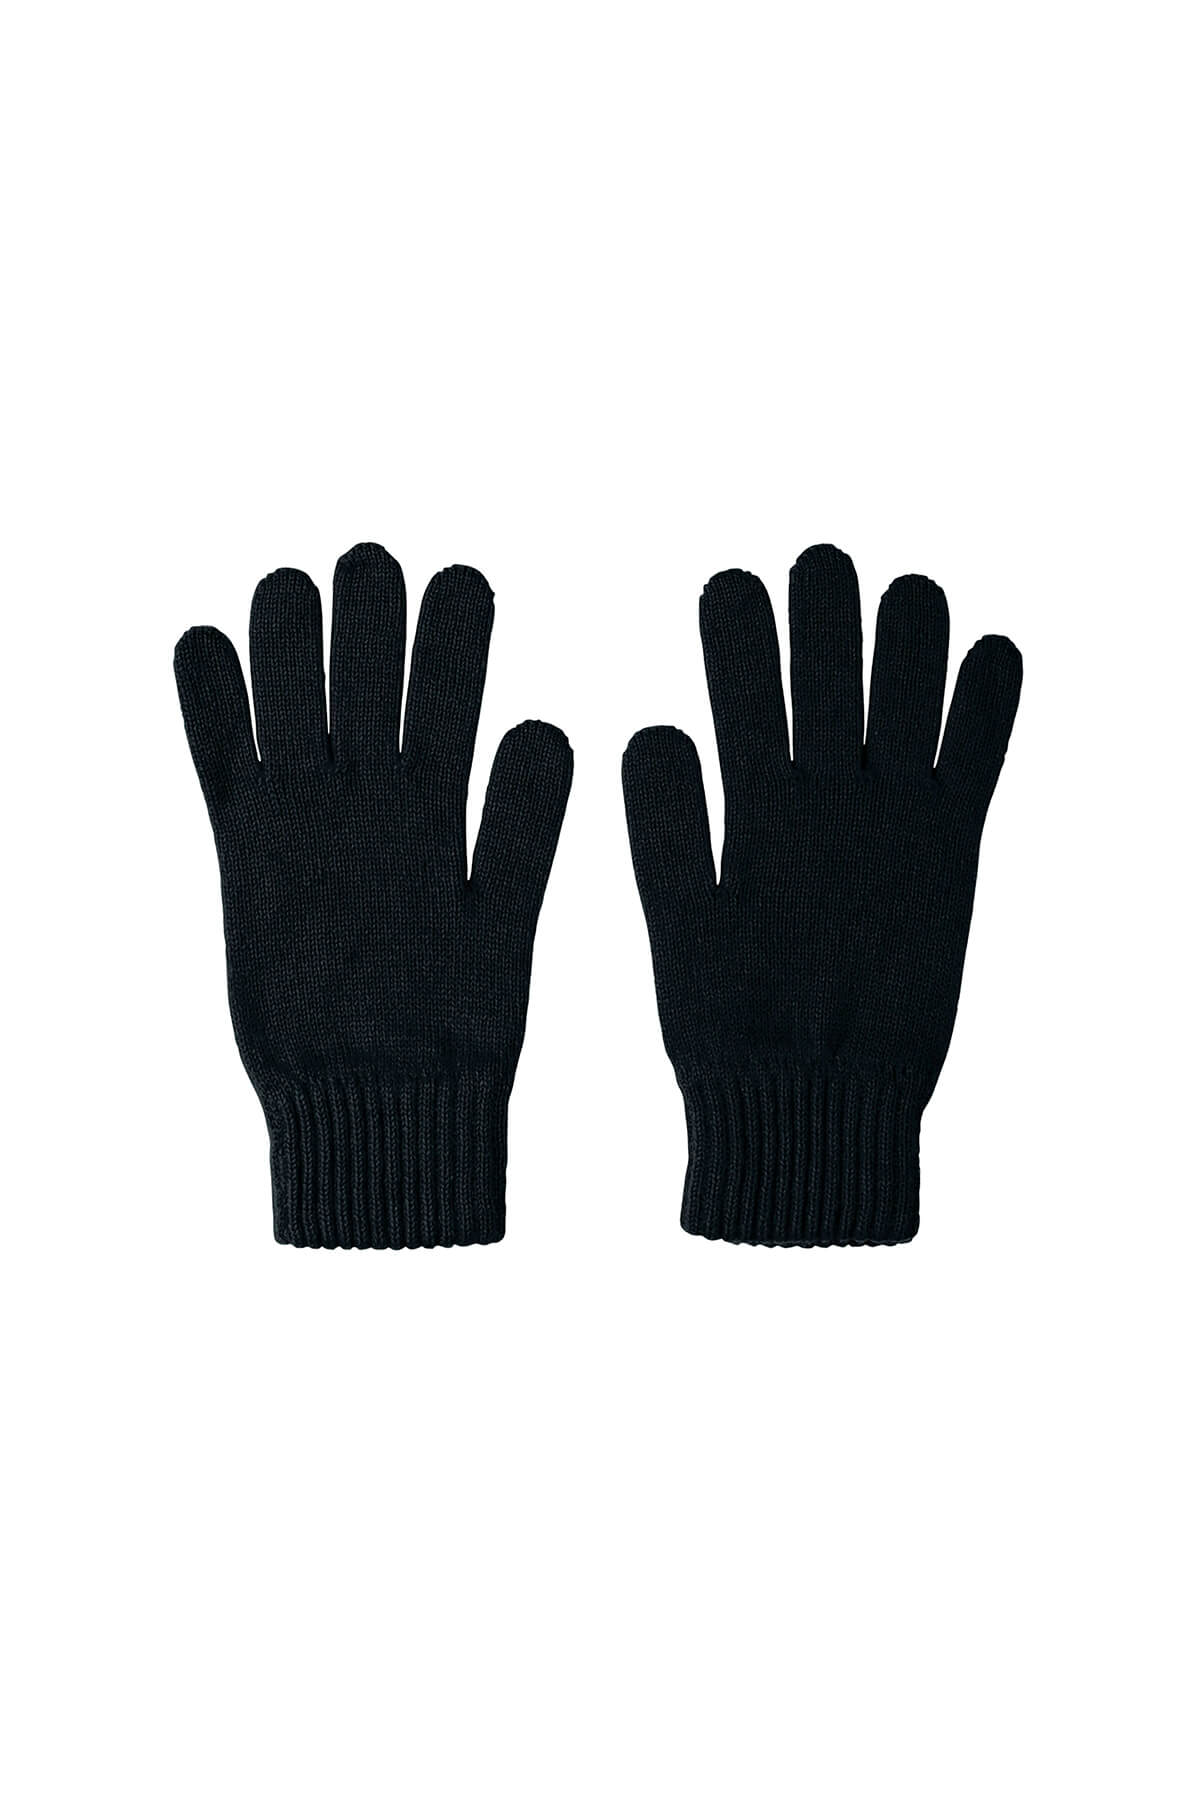 Johnstons of Elgin Men's Cashmere Accessories Gift Set Black Gloves on a white background 365GIFTSET6C